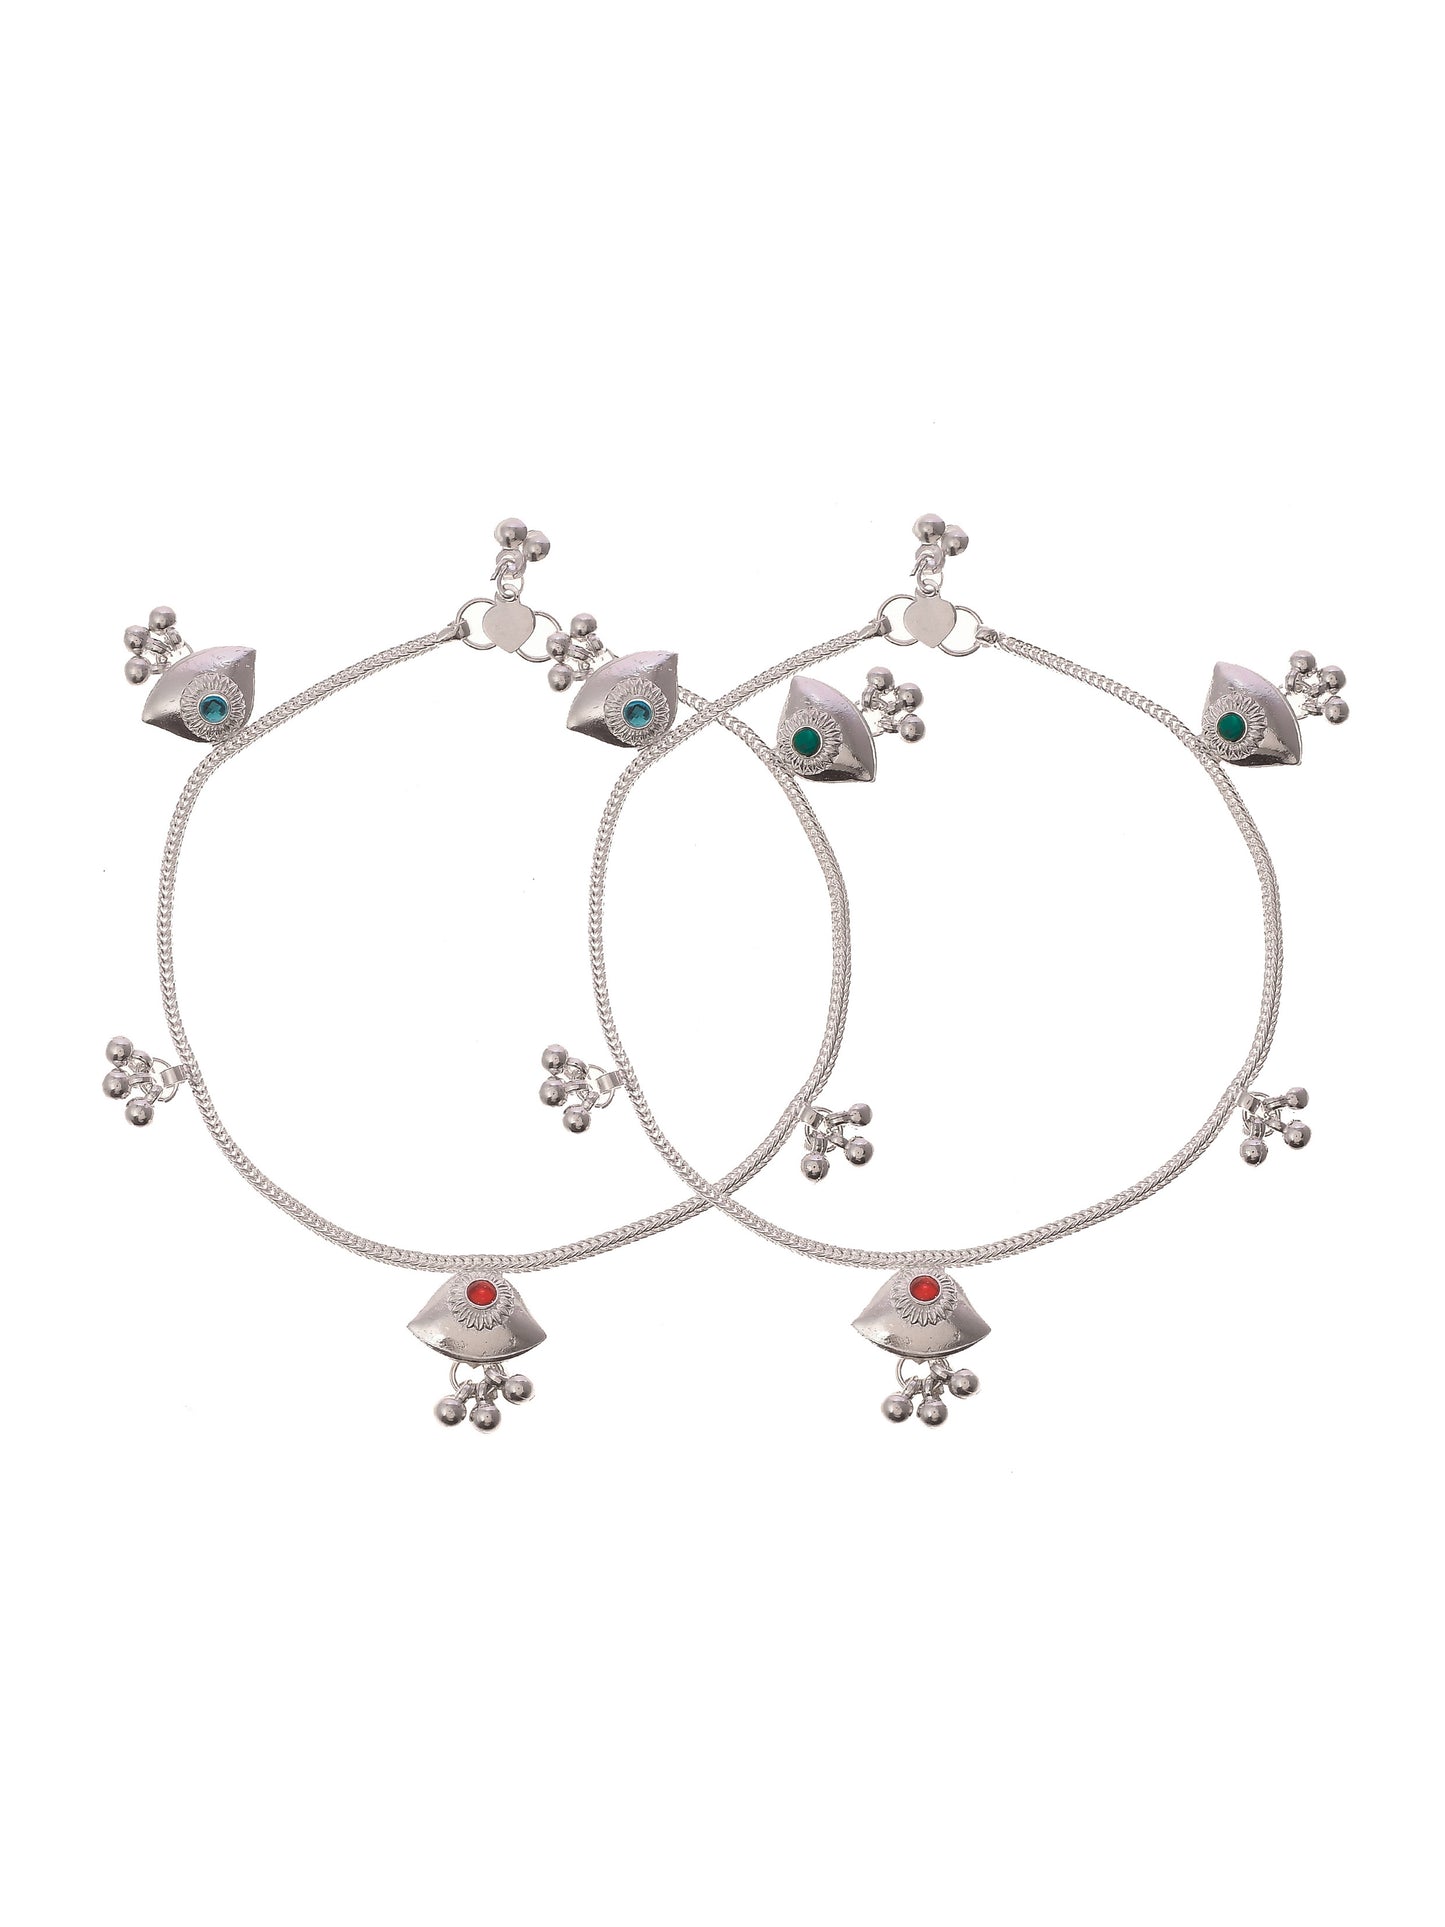 Silver Anklets with stones traditional payal for women